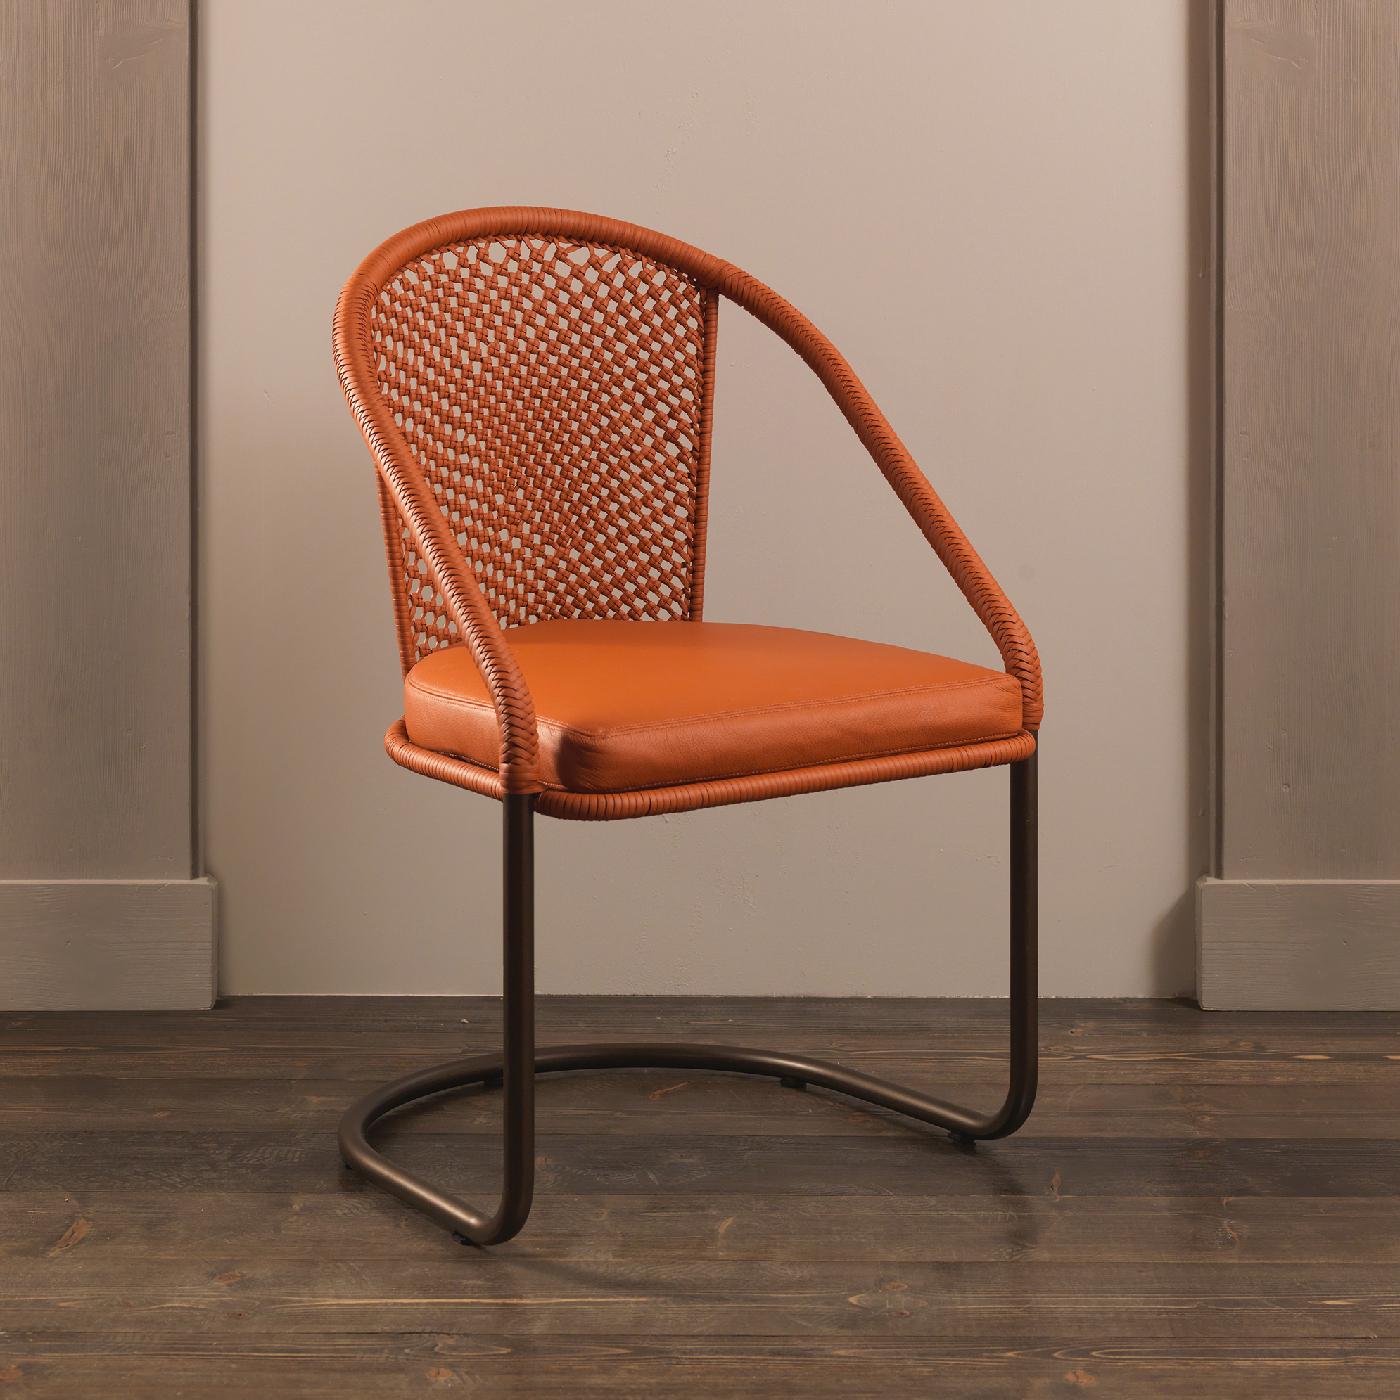 This indoor chair is an exercise in elegant minimalism. It is the result of a collaboration between Officina Ciani and Ciarmoli Queda Studio and will be a unique accent piece in any room in the house. The cantilever structure is fashioned of iron